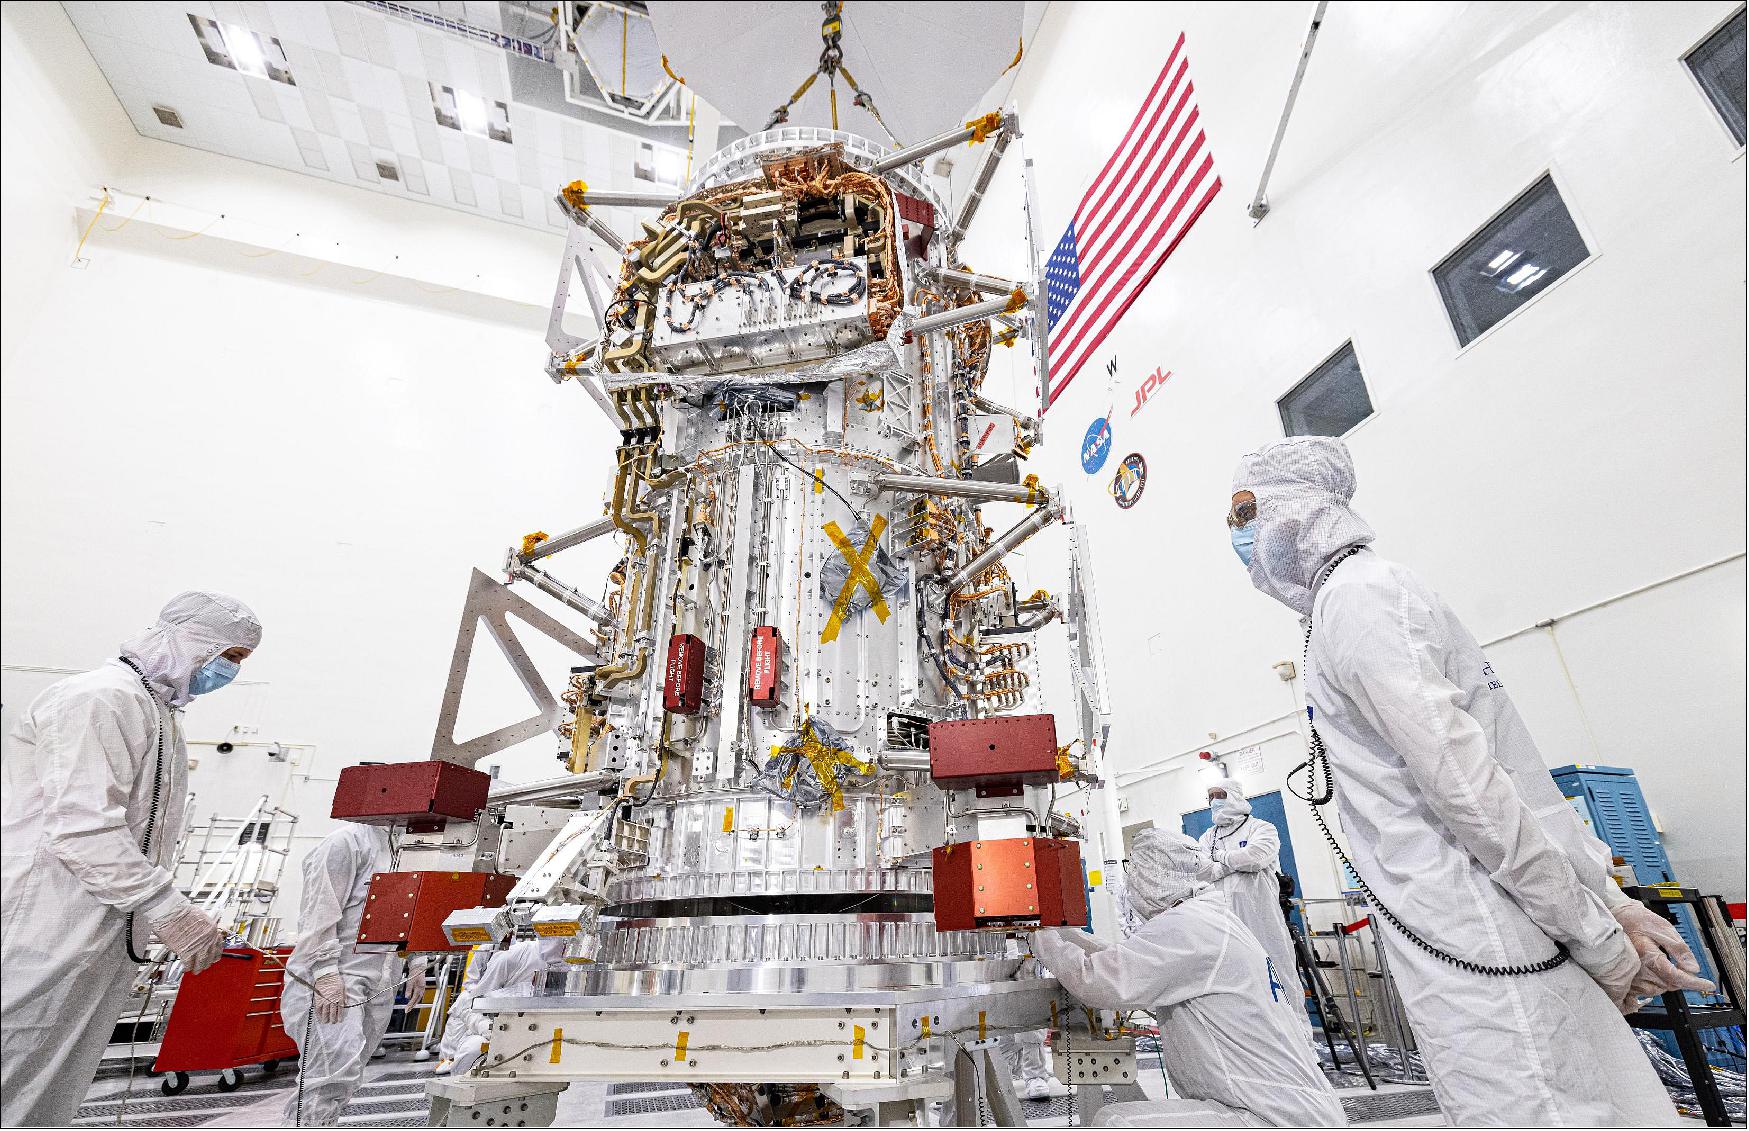 Figure 6: NASA's Europa Clipper spacecraft is visible in a main clean room at JPL, as engineers and technicians inspect it just after delivery in early June 2022 (image credit: NASA/JPL-Caltech/Johns Hopkins APL/Ed Whitman)